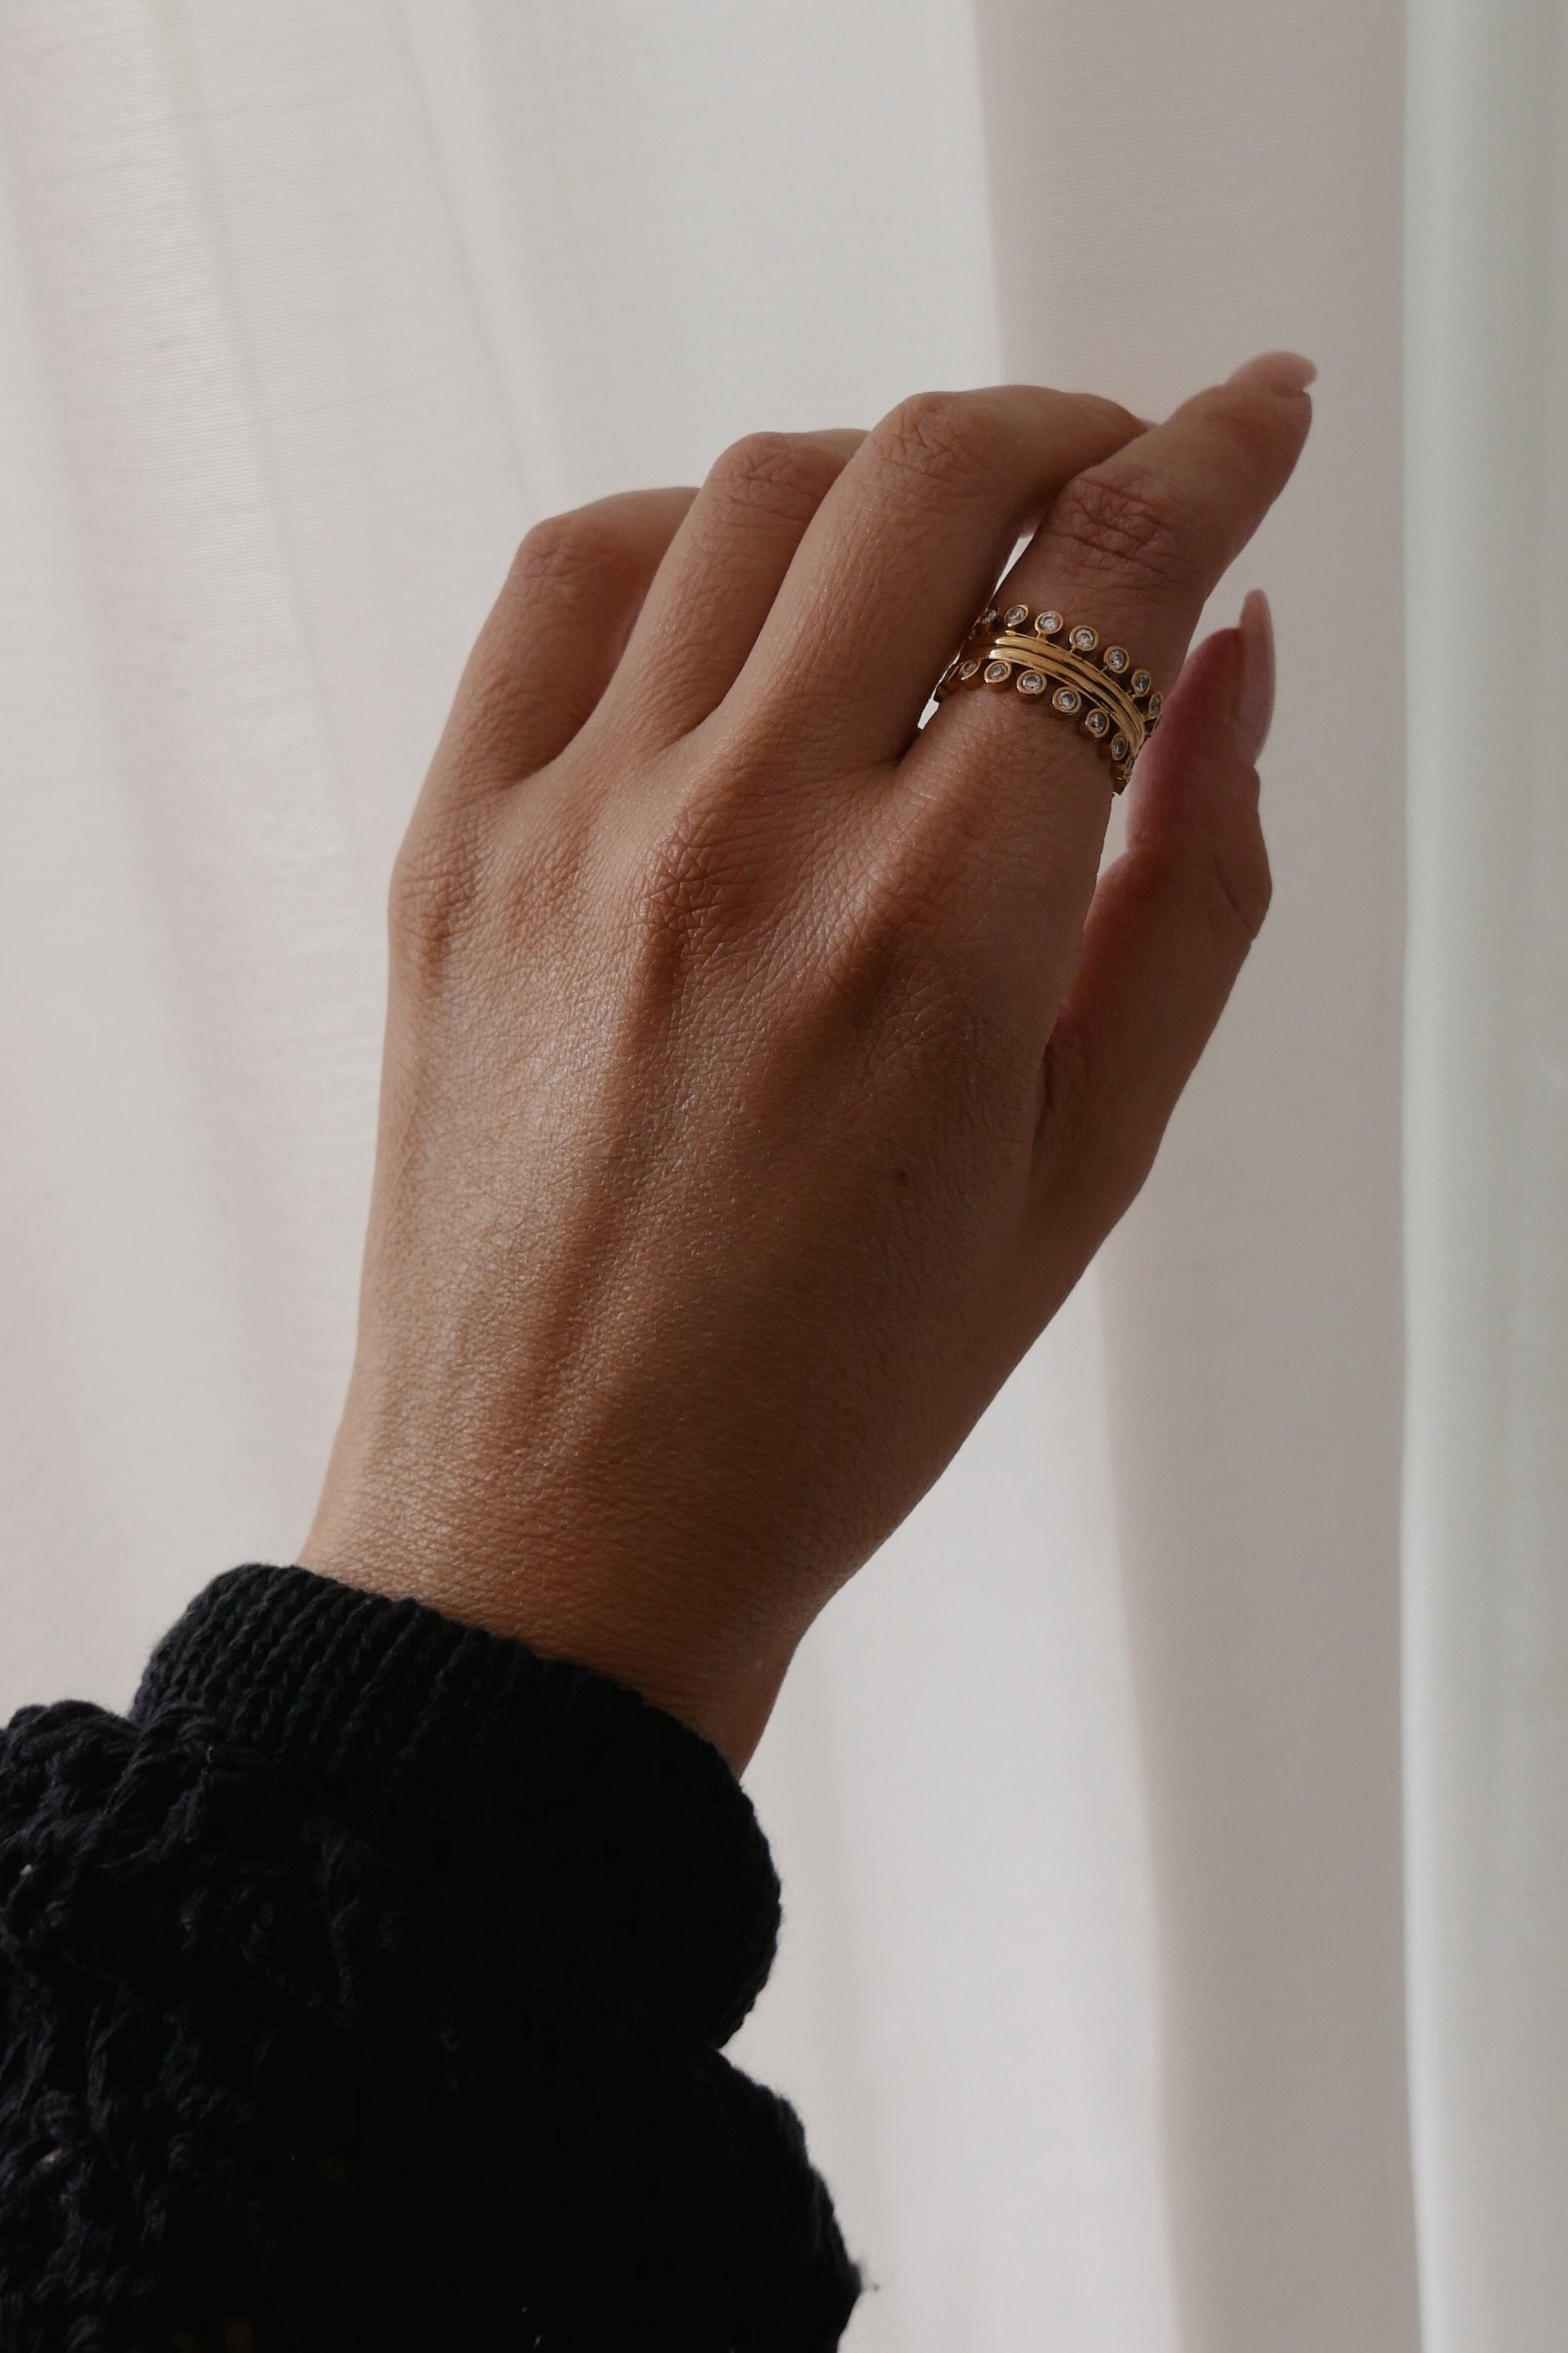 Asia Rings - Boutique Minimaliste has waterproof, durable, elegant and vintage inspired jewelry